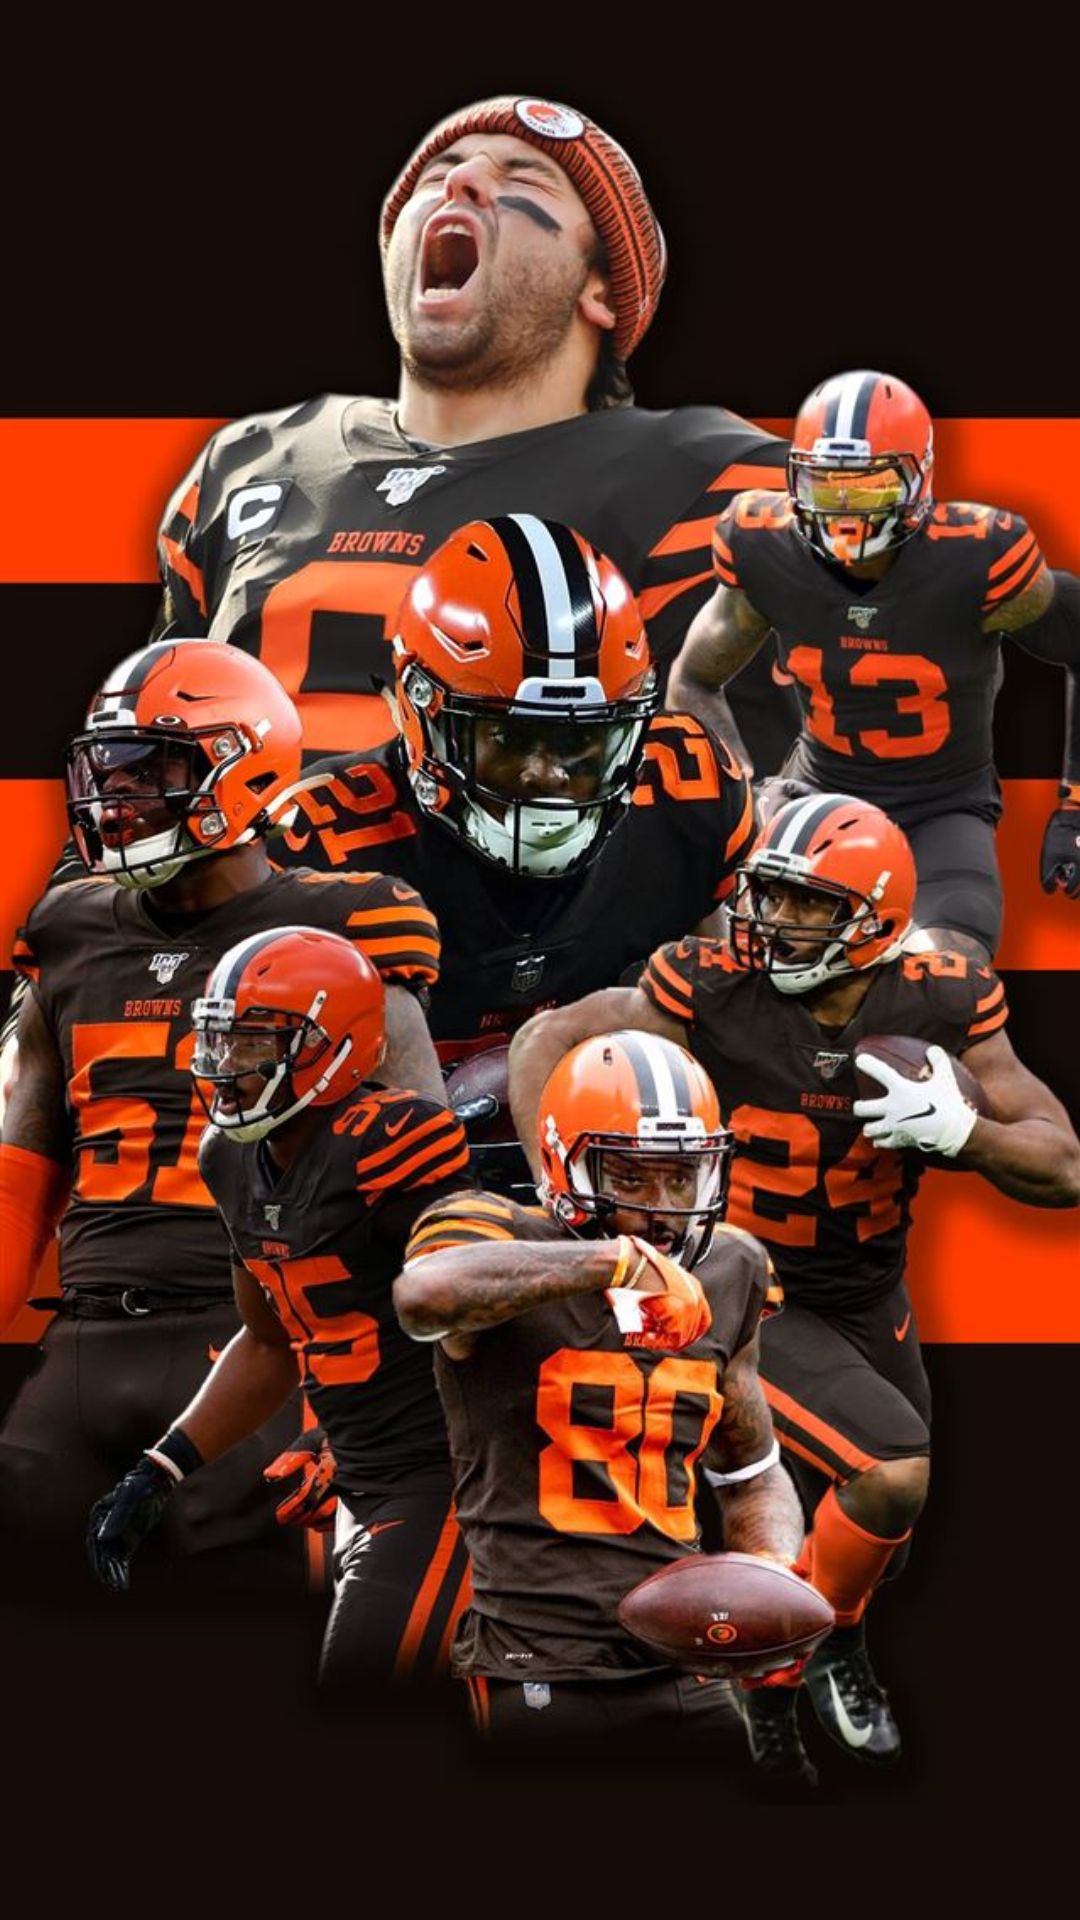 NFL Cleveland Browns  3 Point Stance 19 Poster  Cleveland browns wallpaper  Cleveland browns humor Nfl cleveland browns